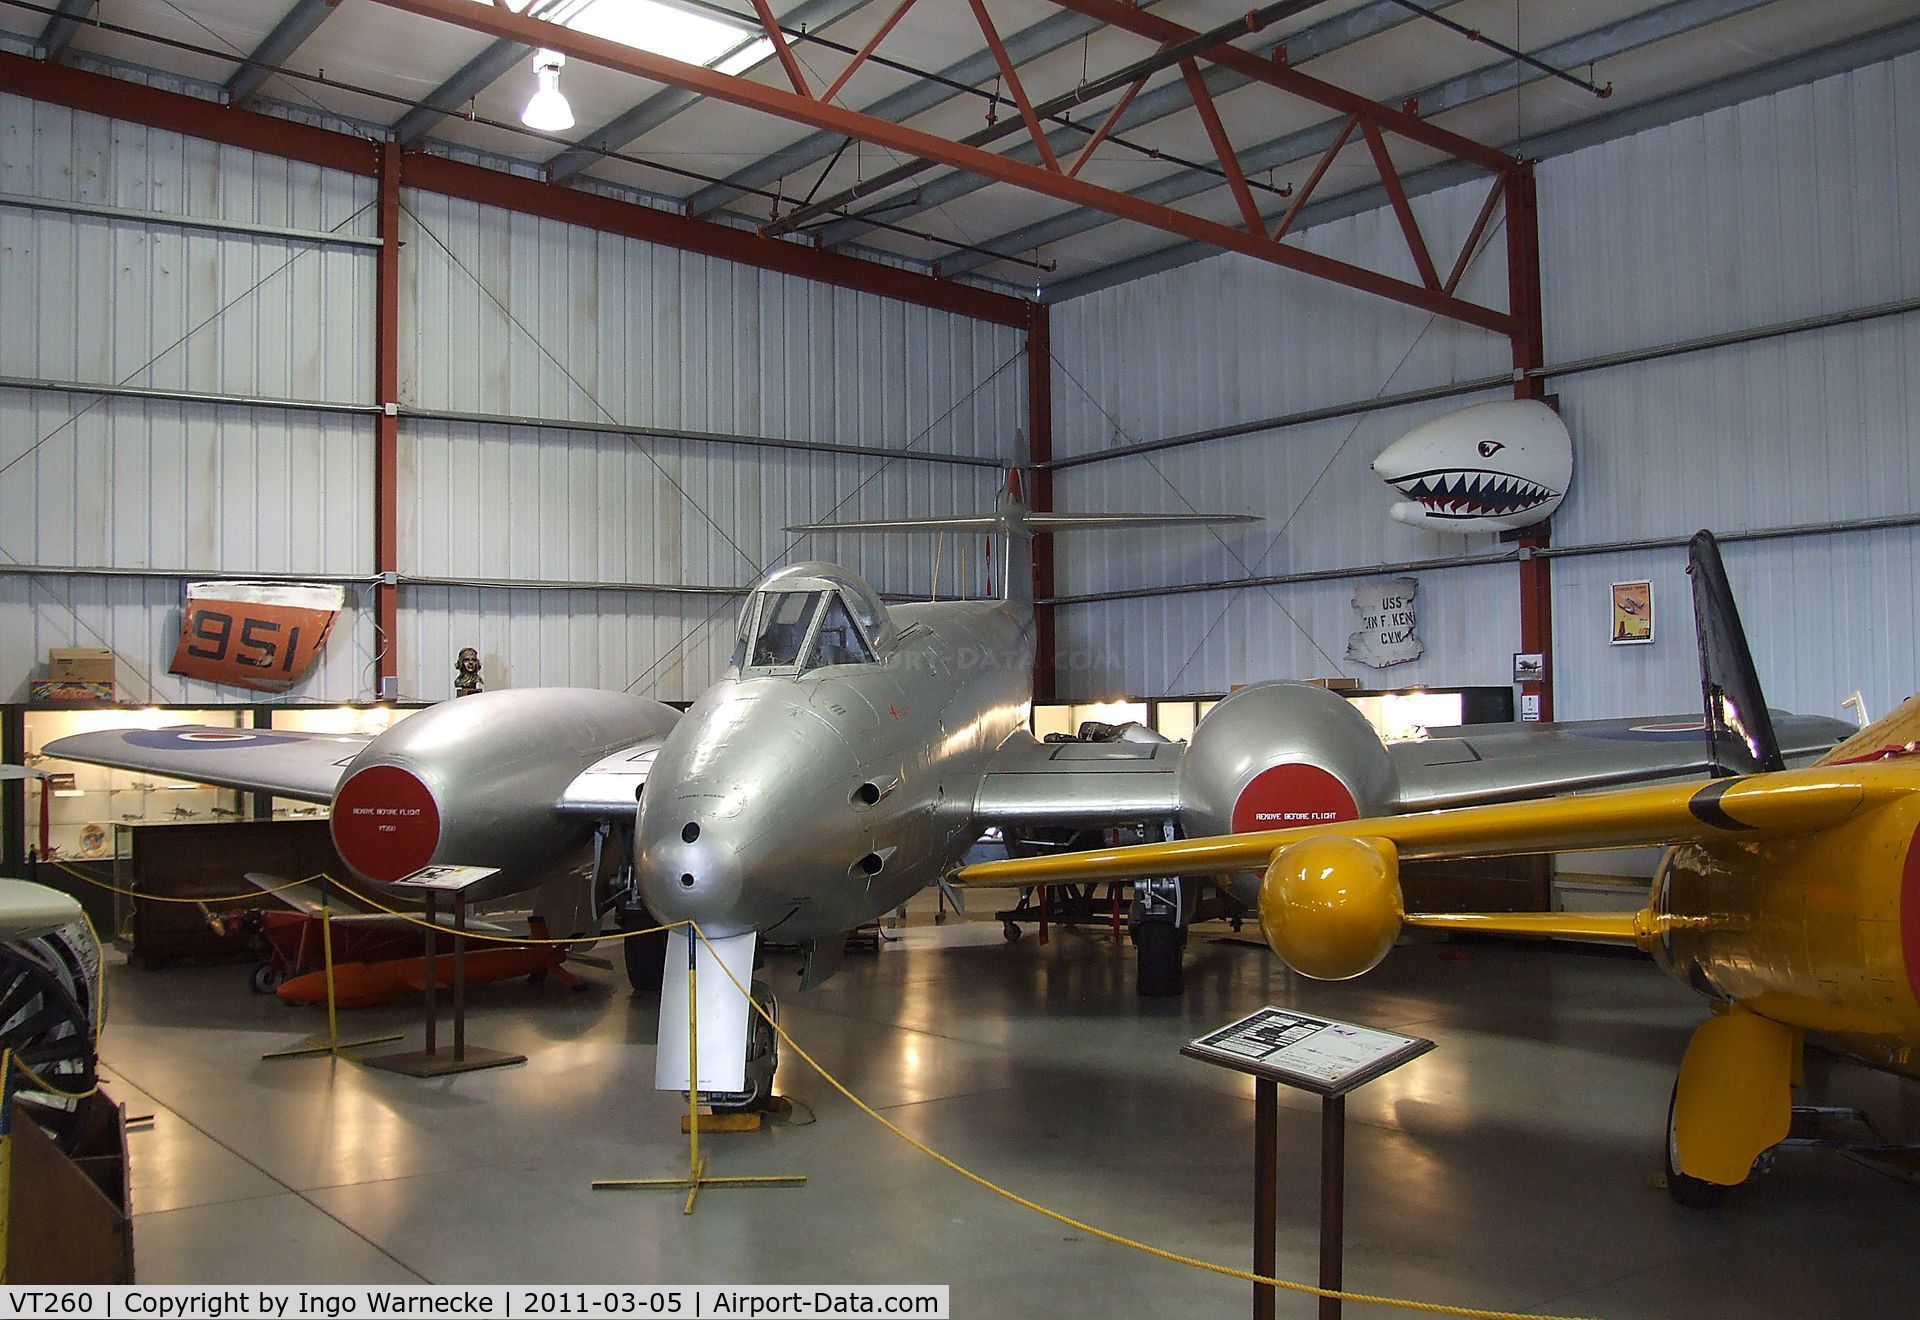 VT260, Gloster Meteor F.4 C/N Not found VT260, Gloster Meteor F4 at the Planes of Fame Air Museum, Chino CA